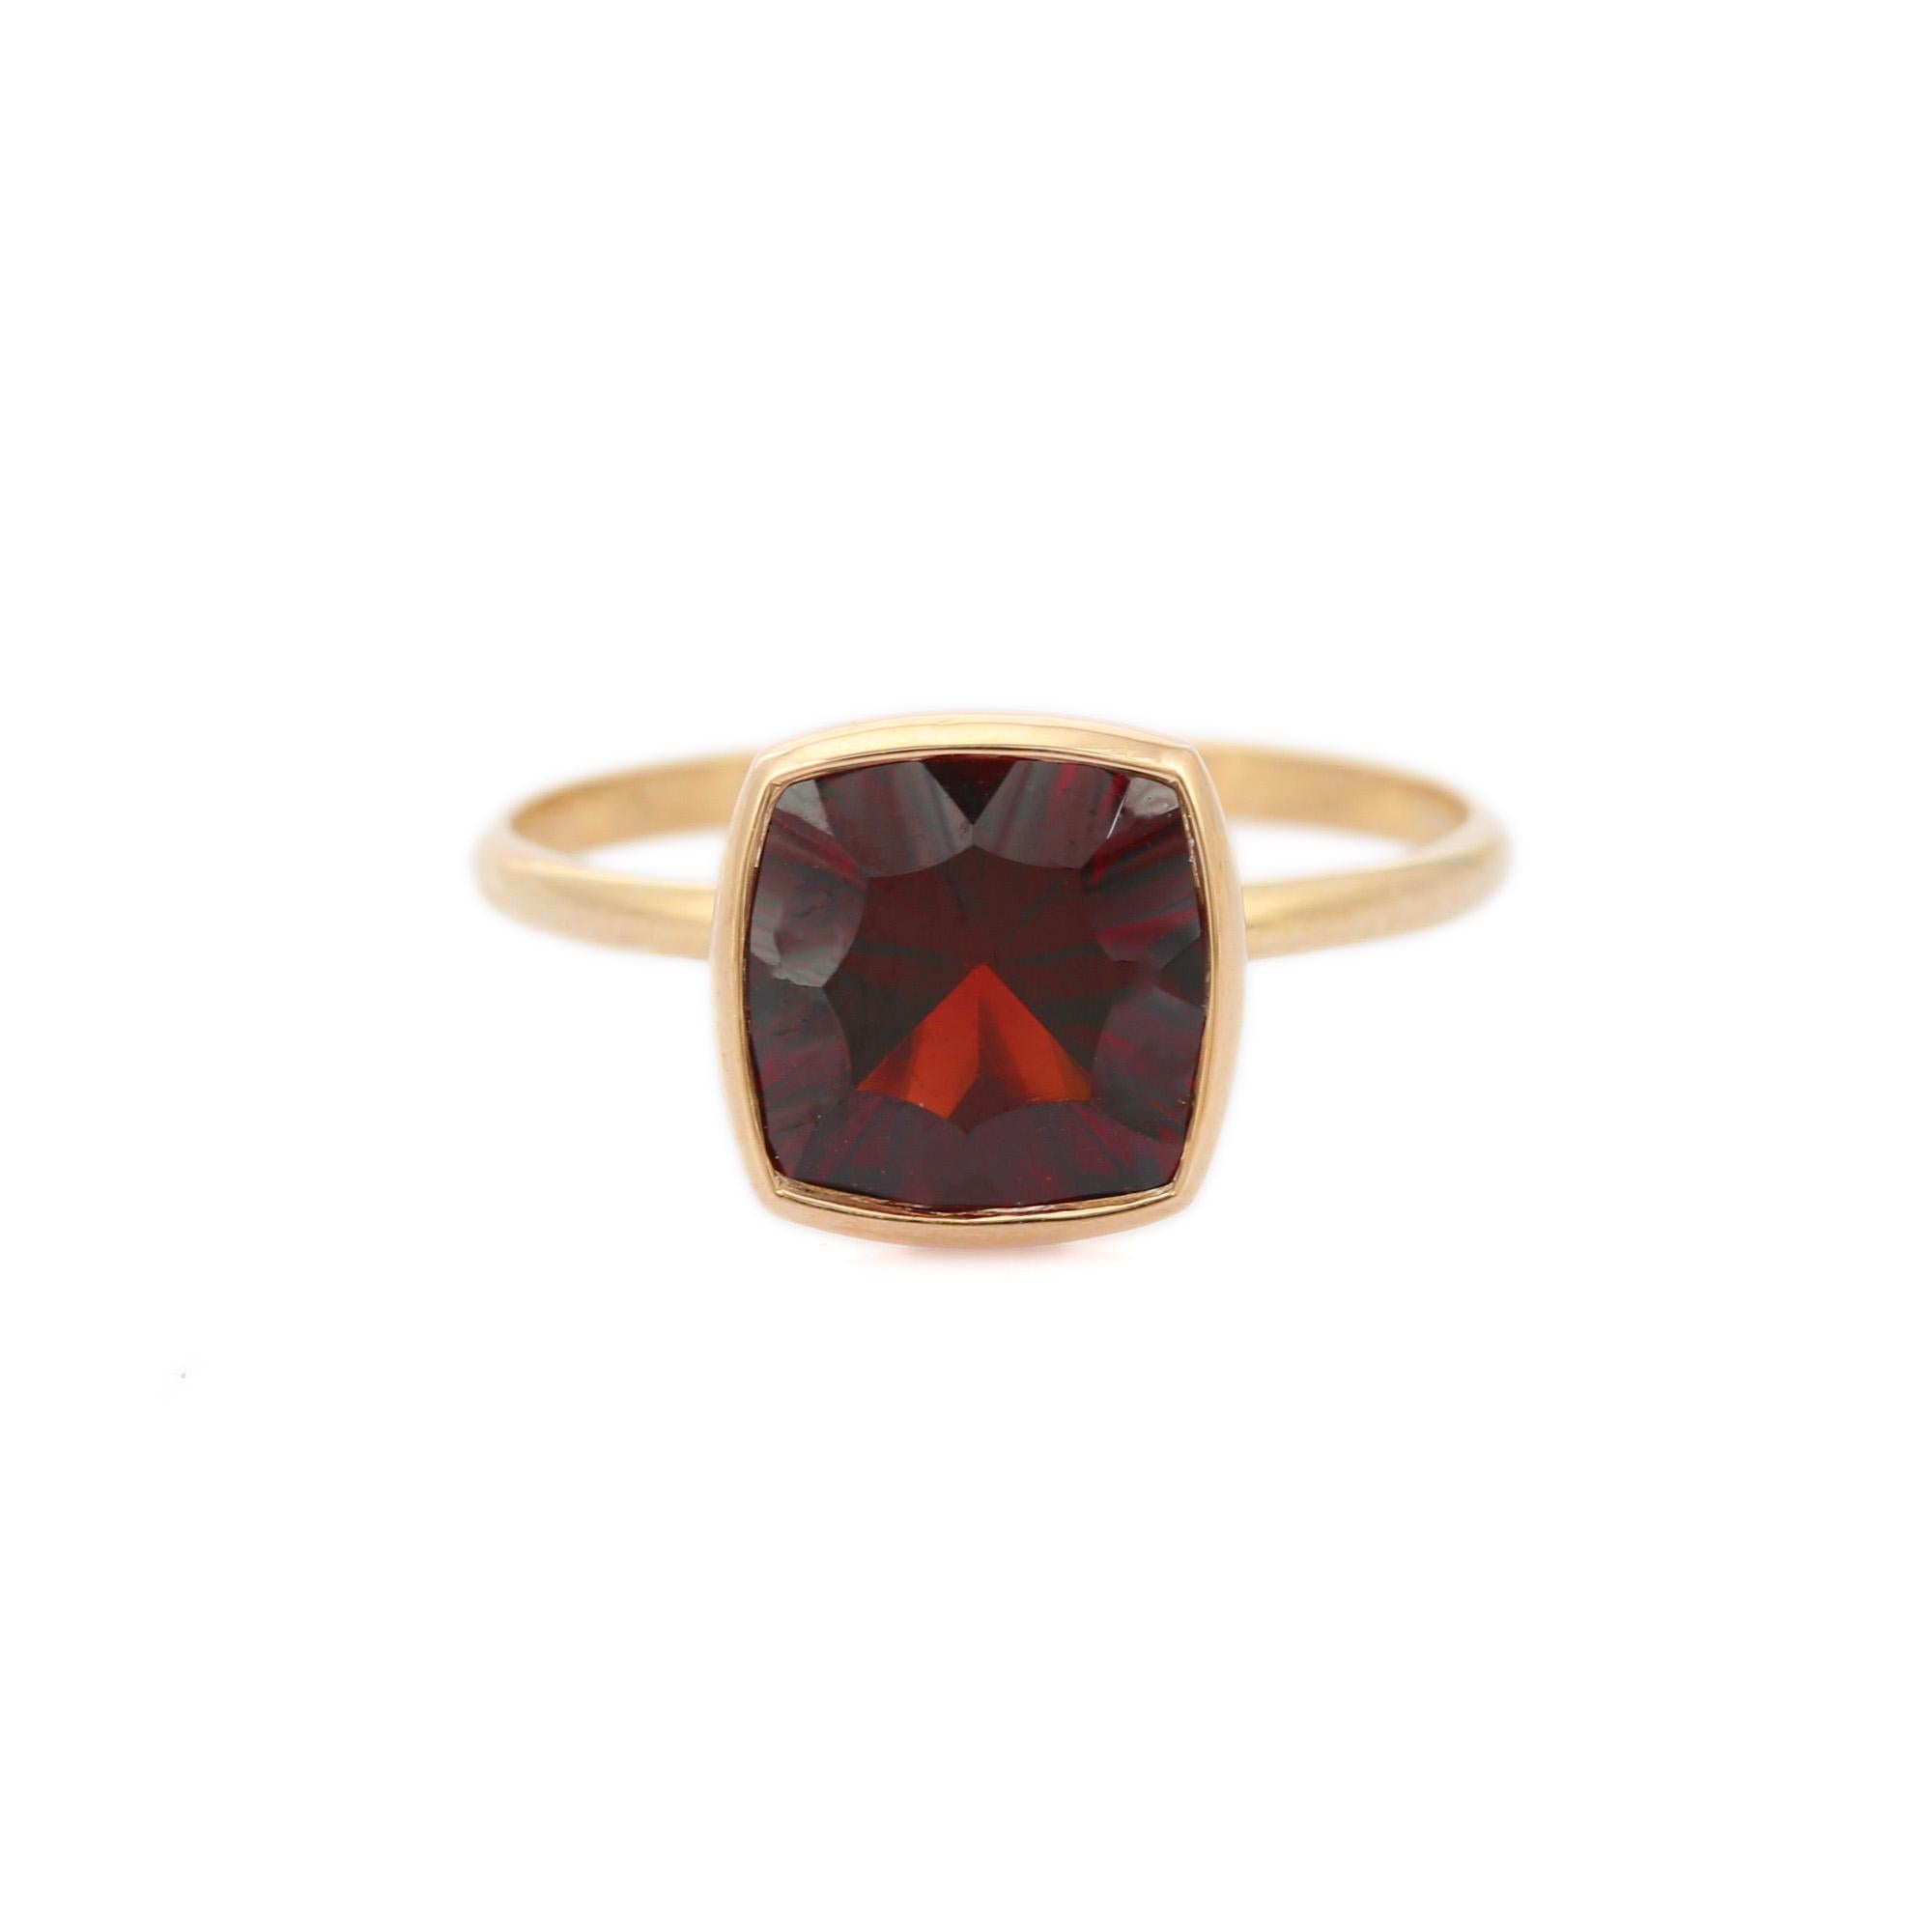 For Sale:  2.85 Carat Garnet Solitaire Ring in 14K Yellow Gold 4